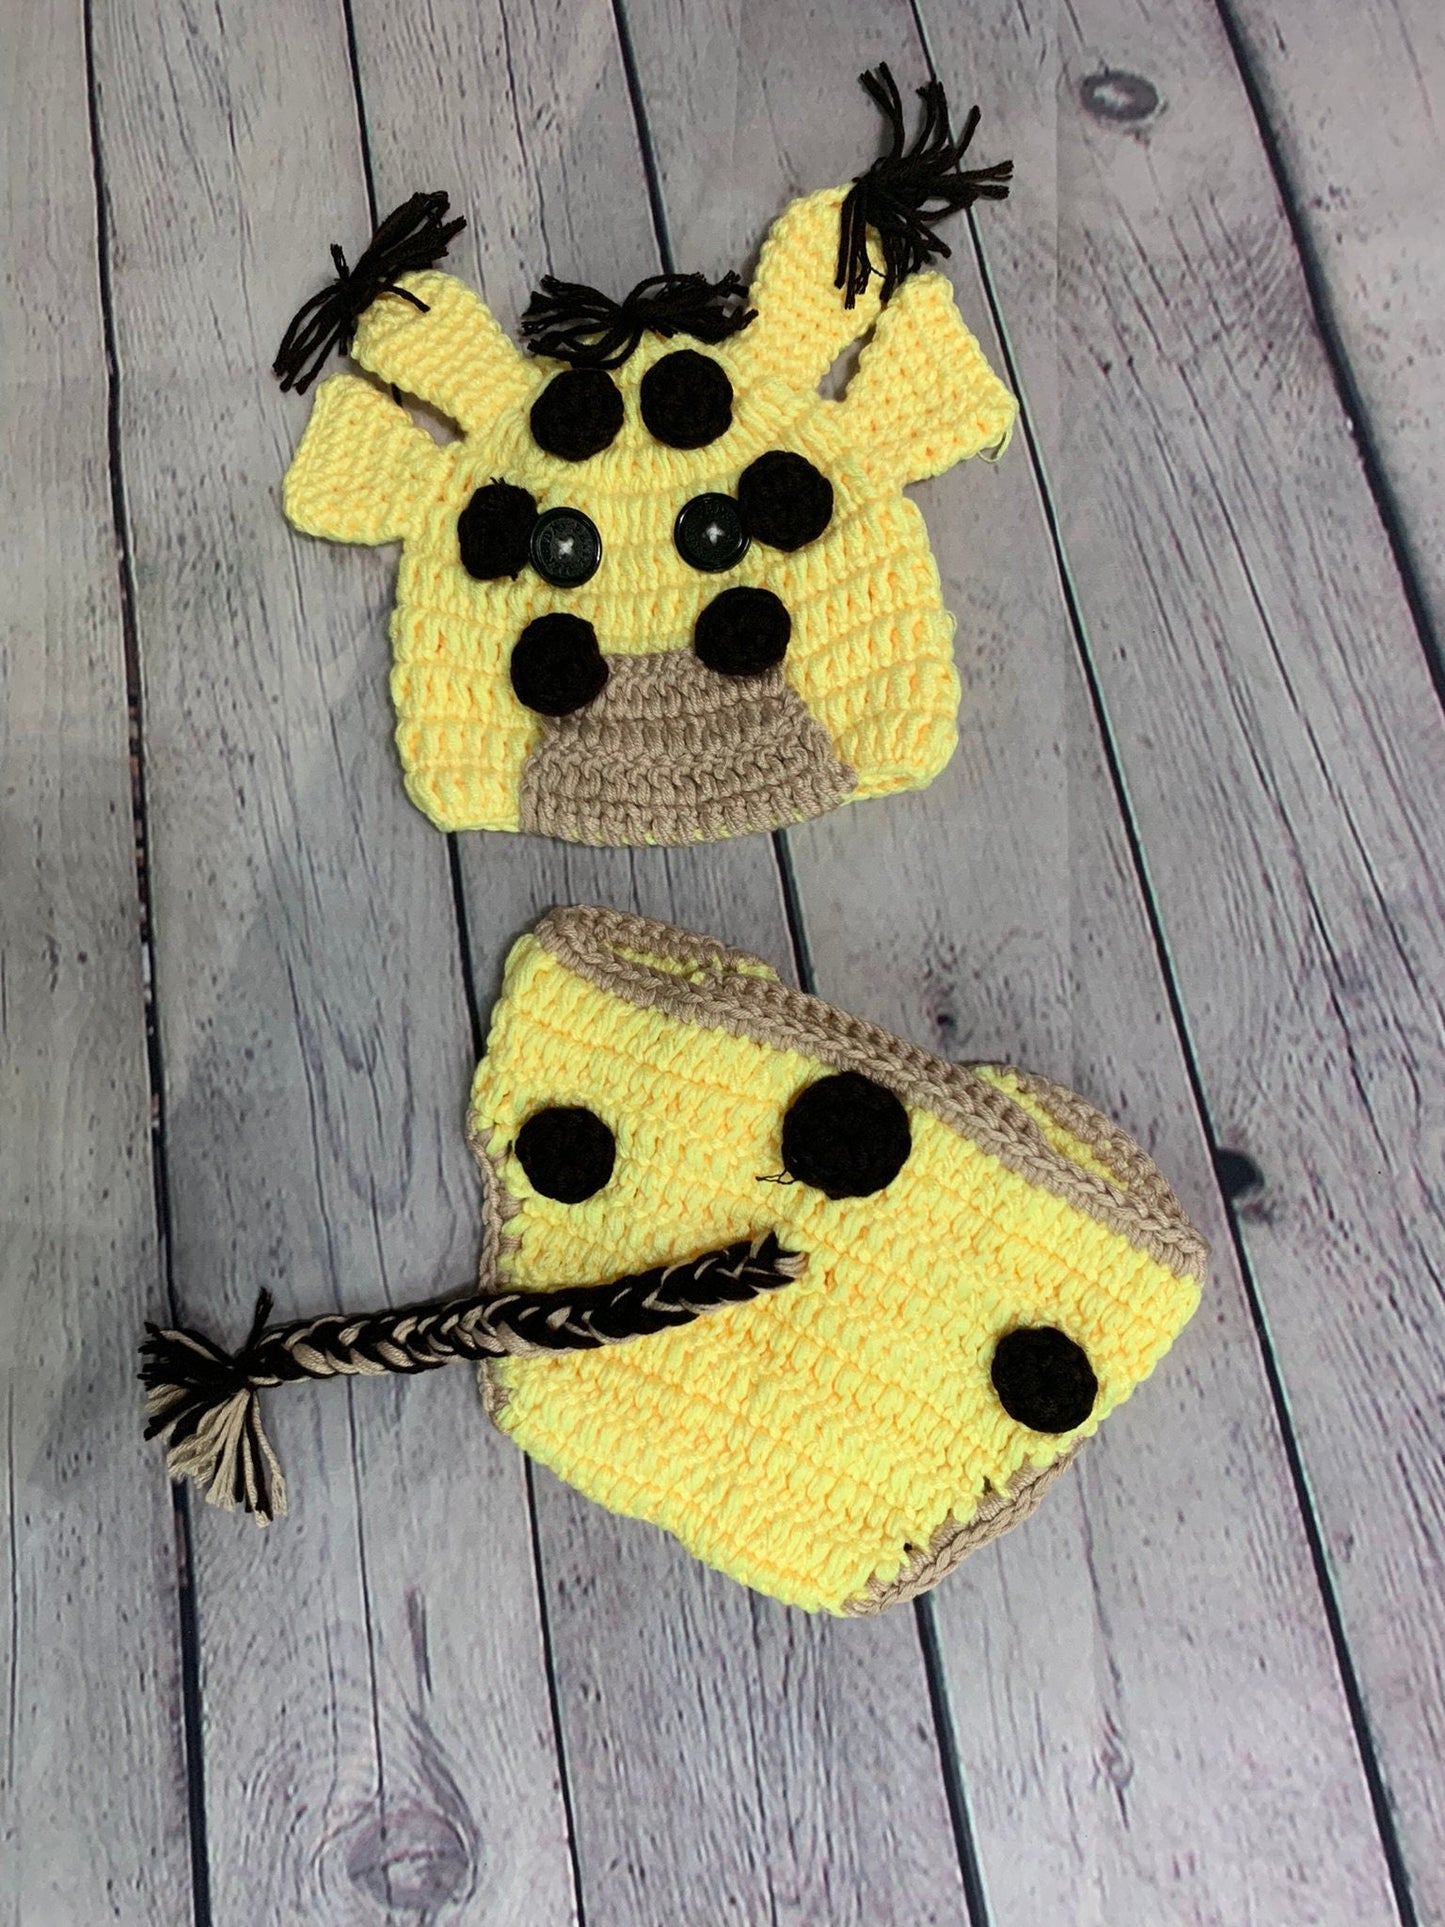 Tiny Baby Giraffe Crochet Outfit - Adorable Newborn Halloween Costume - TinySweetPeaBoutique